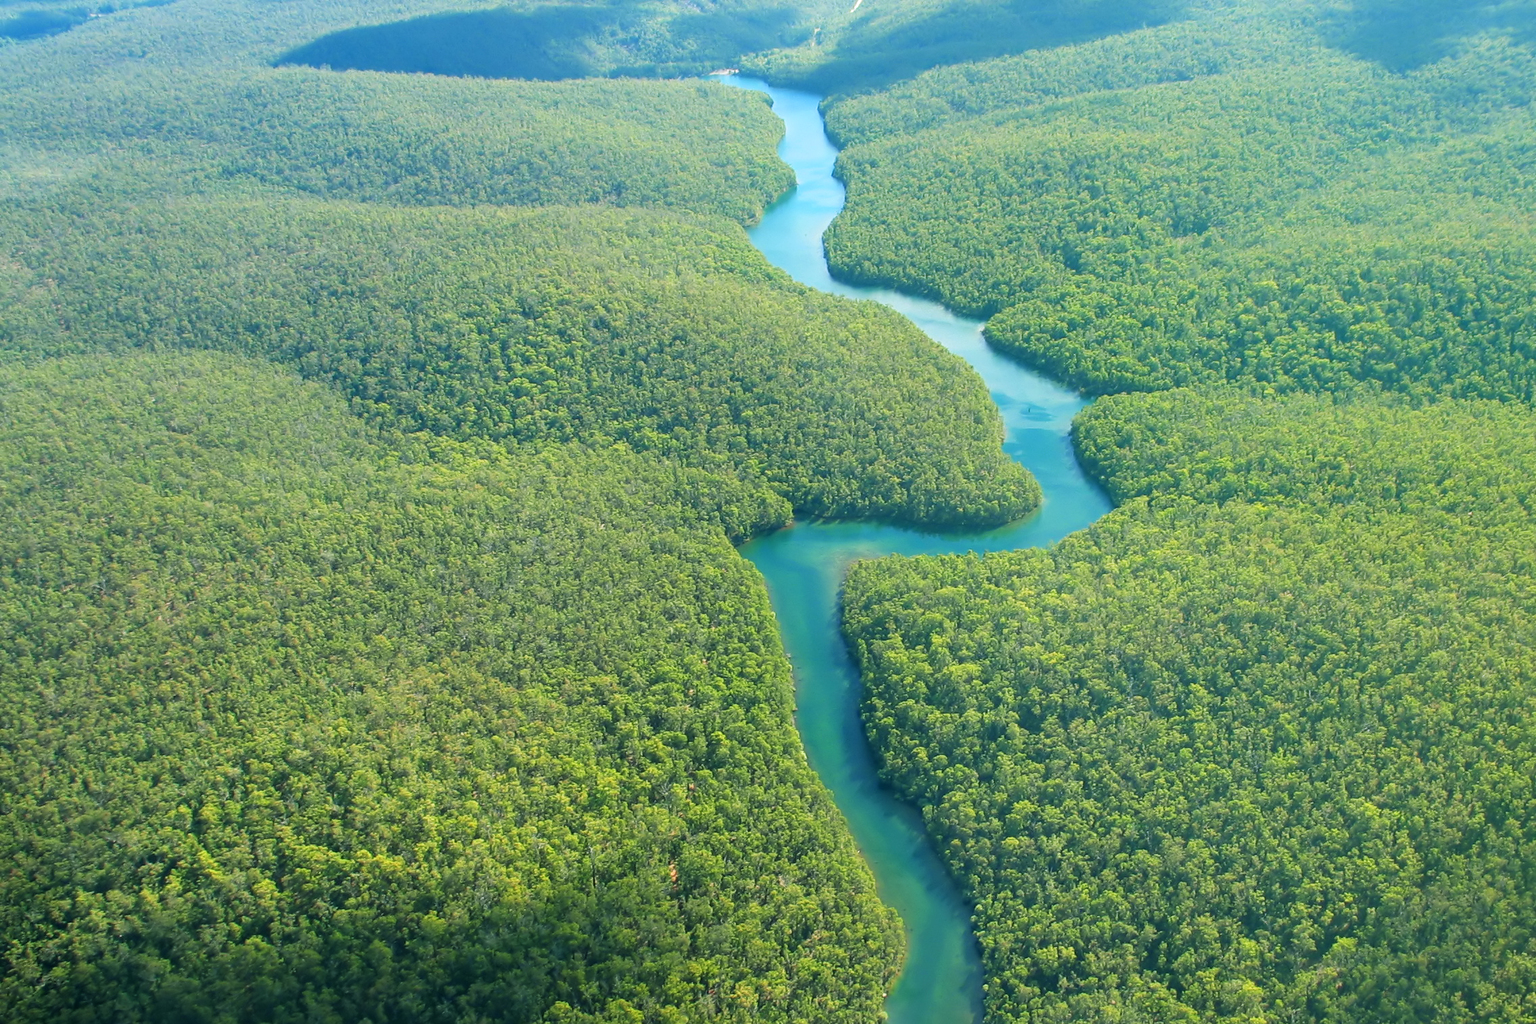 Greenery and River Aerial Photo